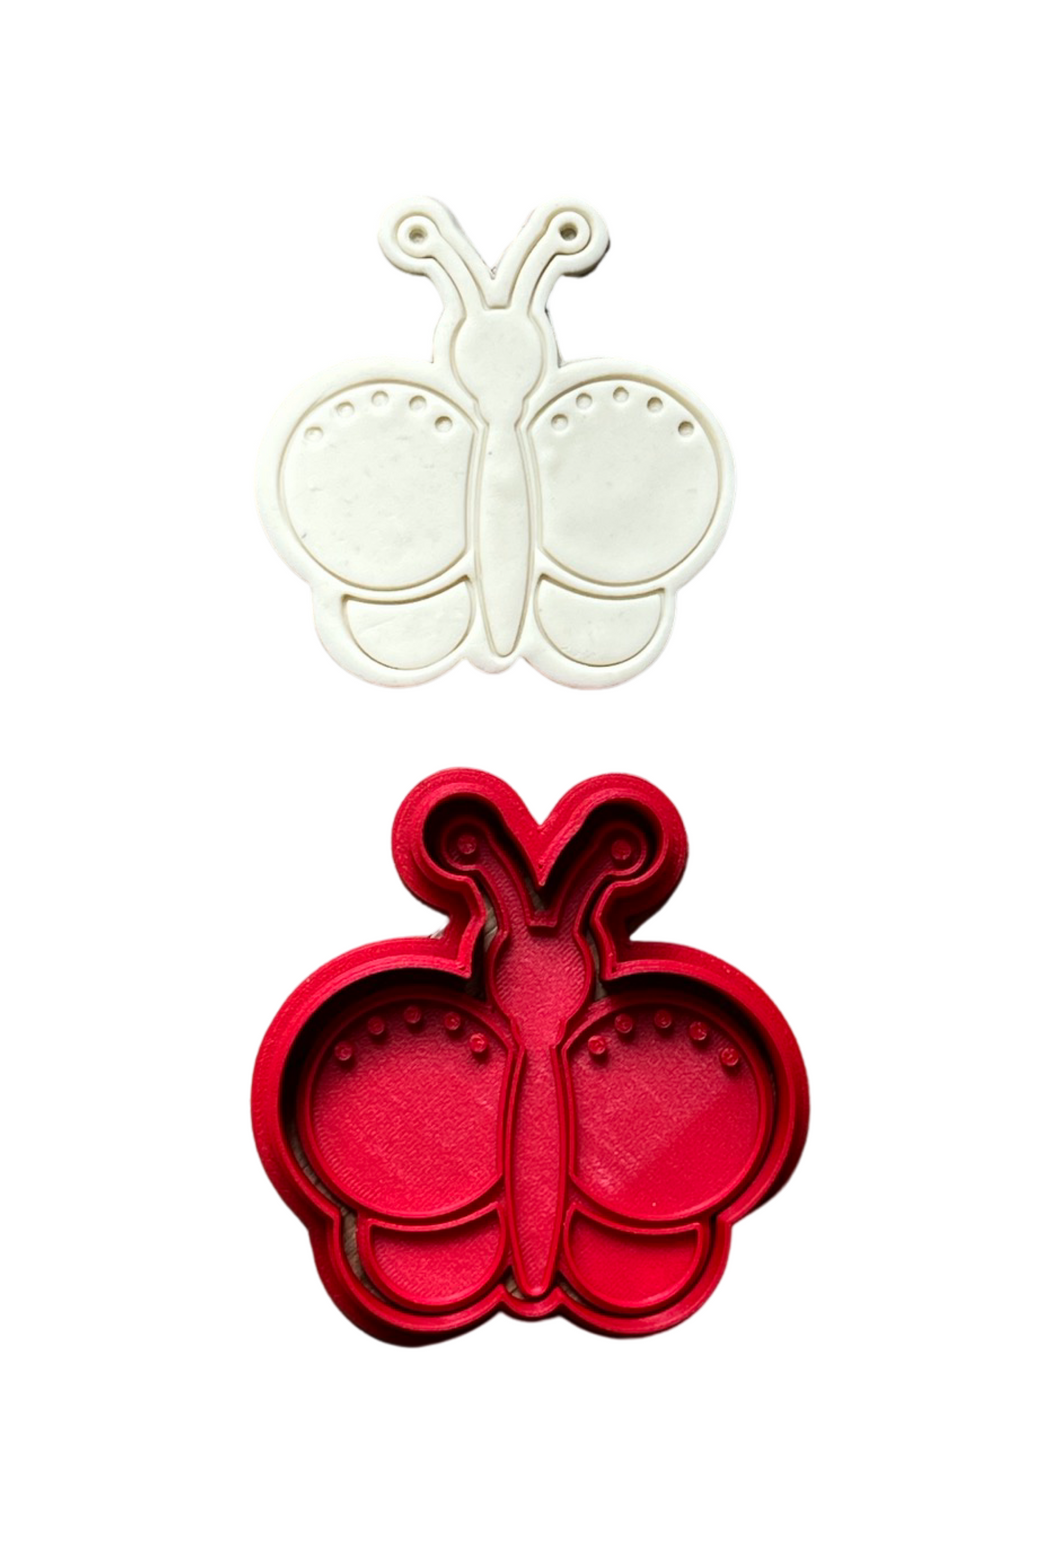 Butterfly cookie cutter stamp